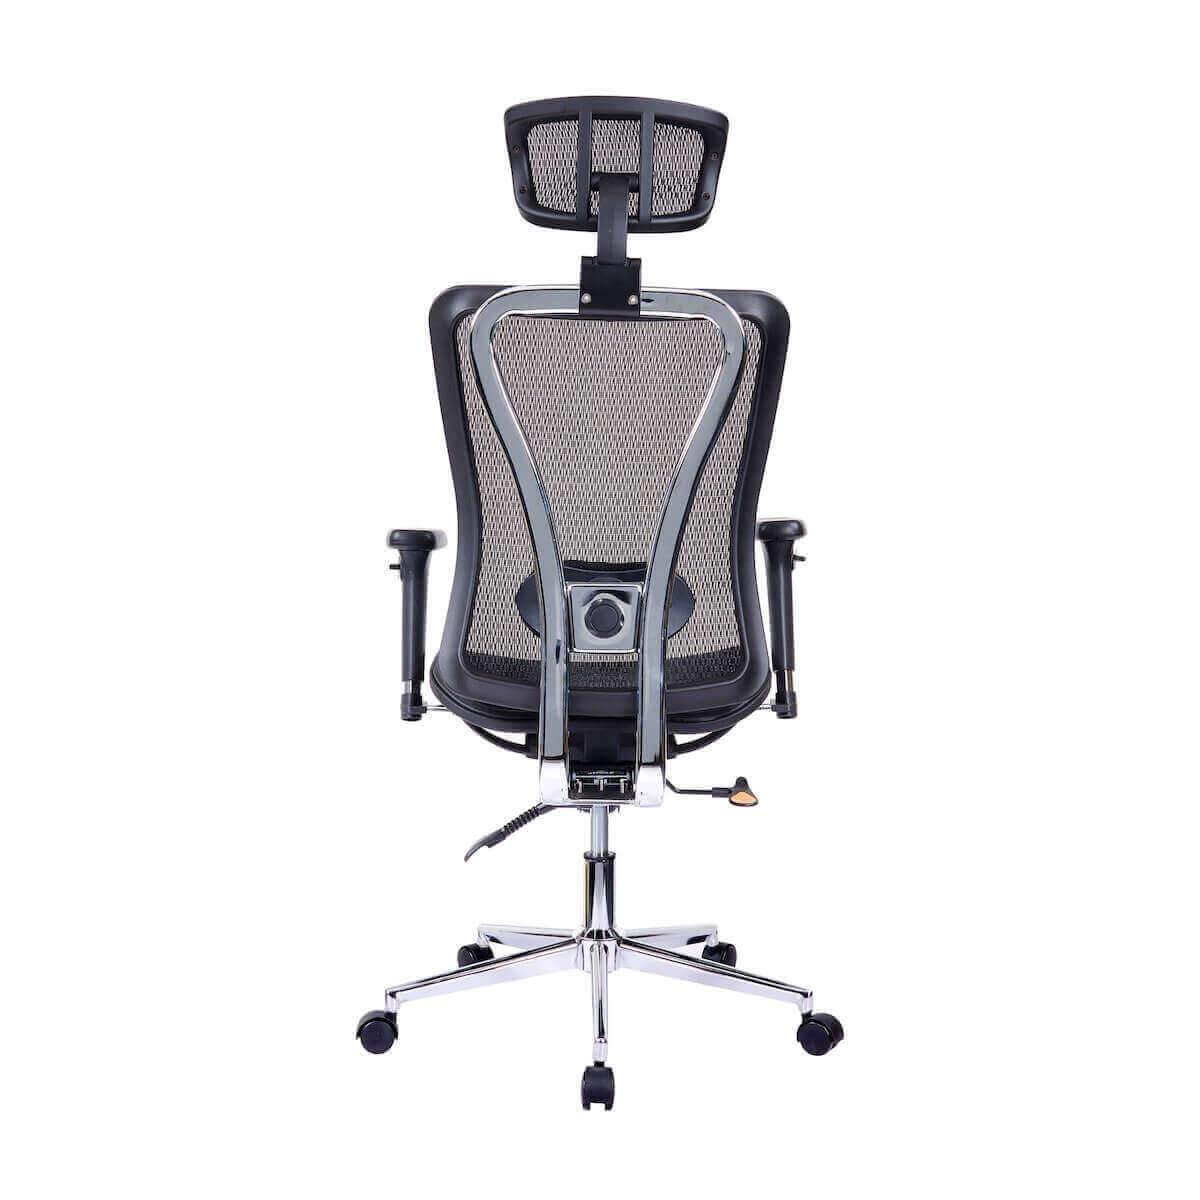 Techni Mobili Black High Back Executive Mesh Office Chair with Arms, Headrest, and Lumbar Support RTA-1009-BK Back